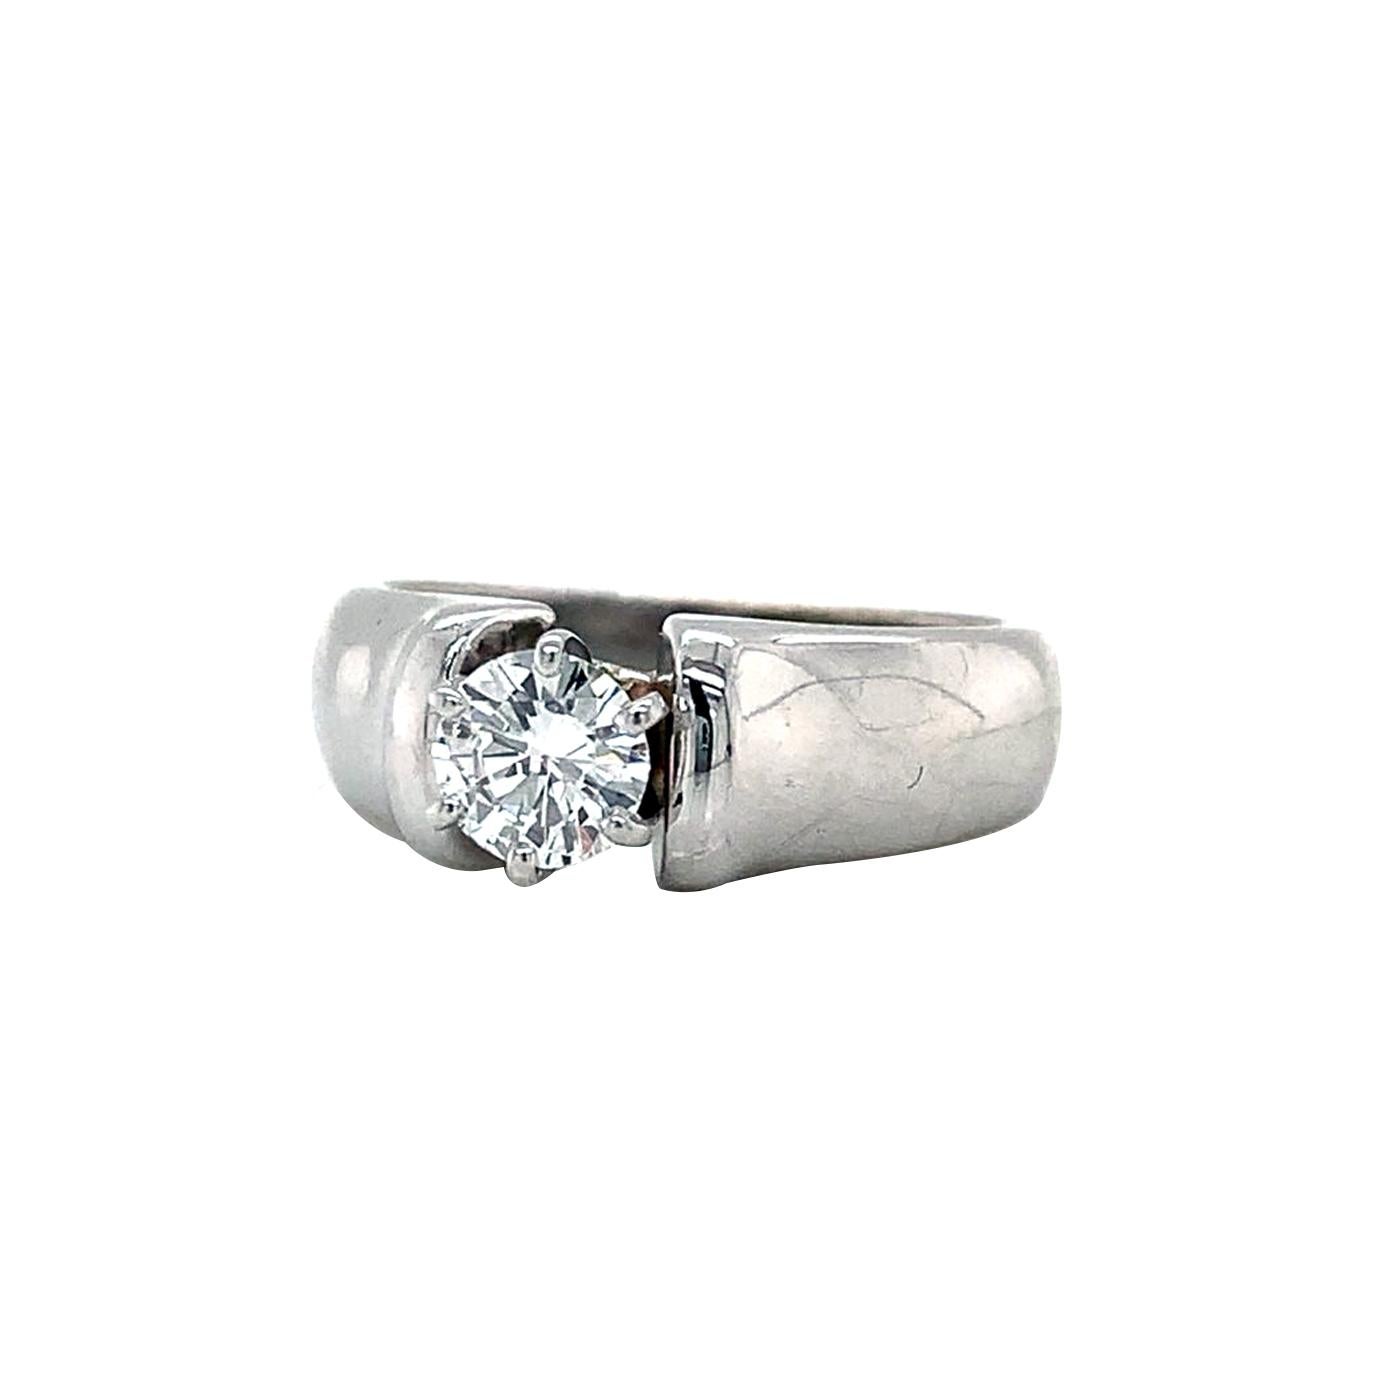 Created in 14K White Gold 
Shape and Cutting Style: Round Brilliant





Clarity Characteristics: Crystal, Cloud, Indented Natural


About us:
Cashingdiamonds is not an authorized dealer or licensor of any of the products we sell. We do not claim